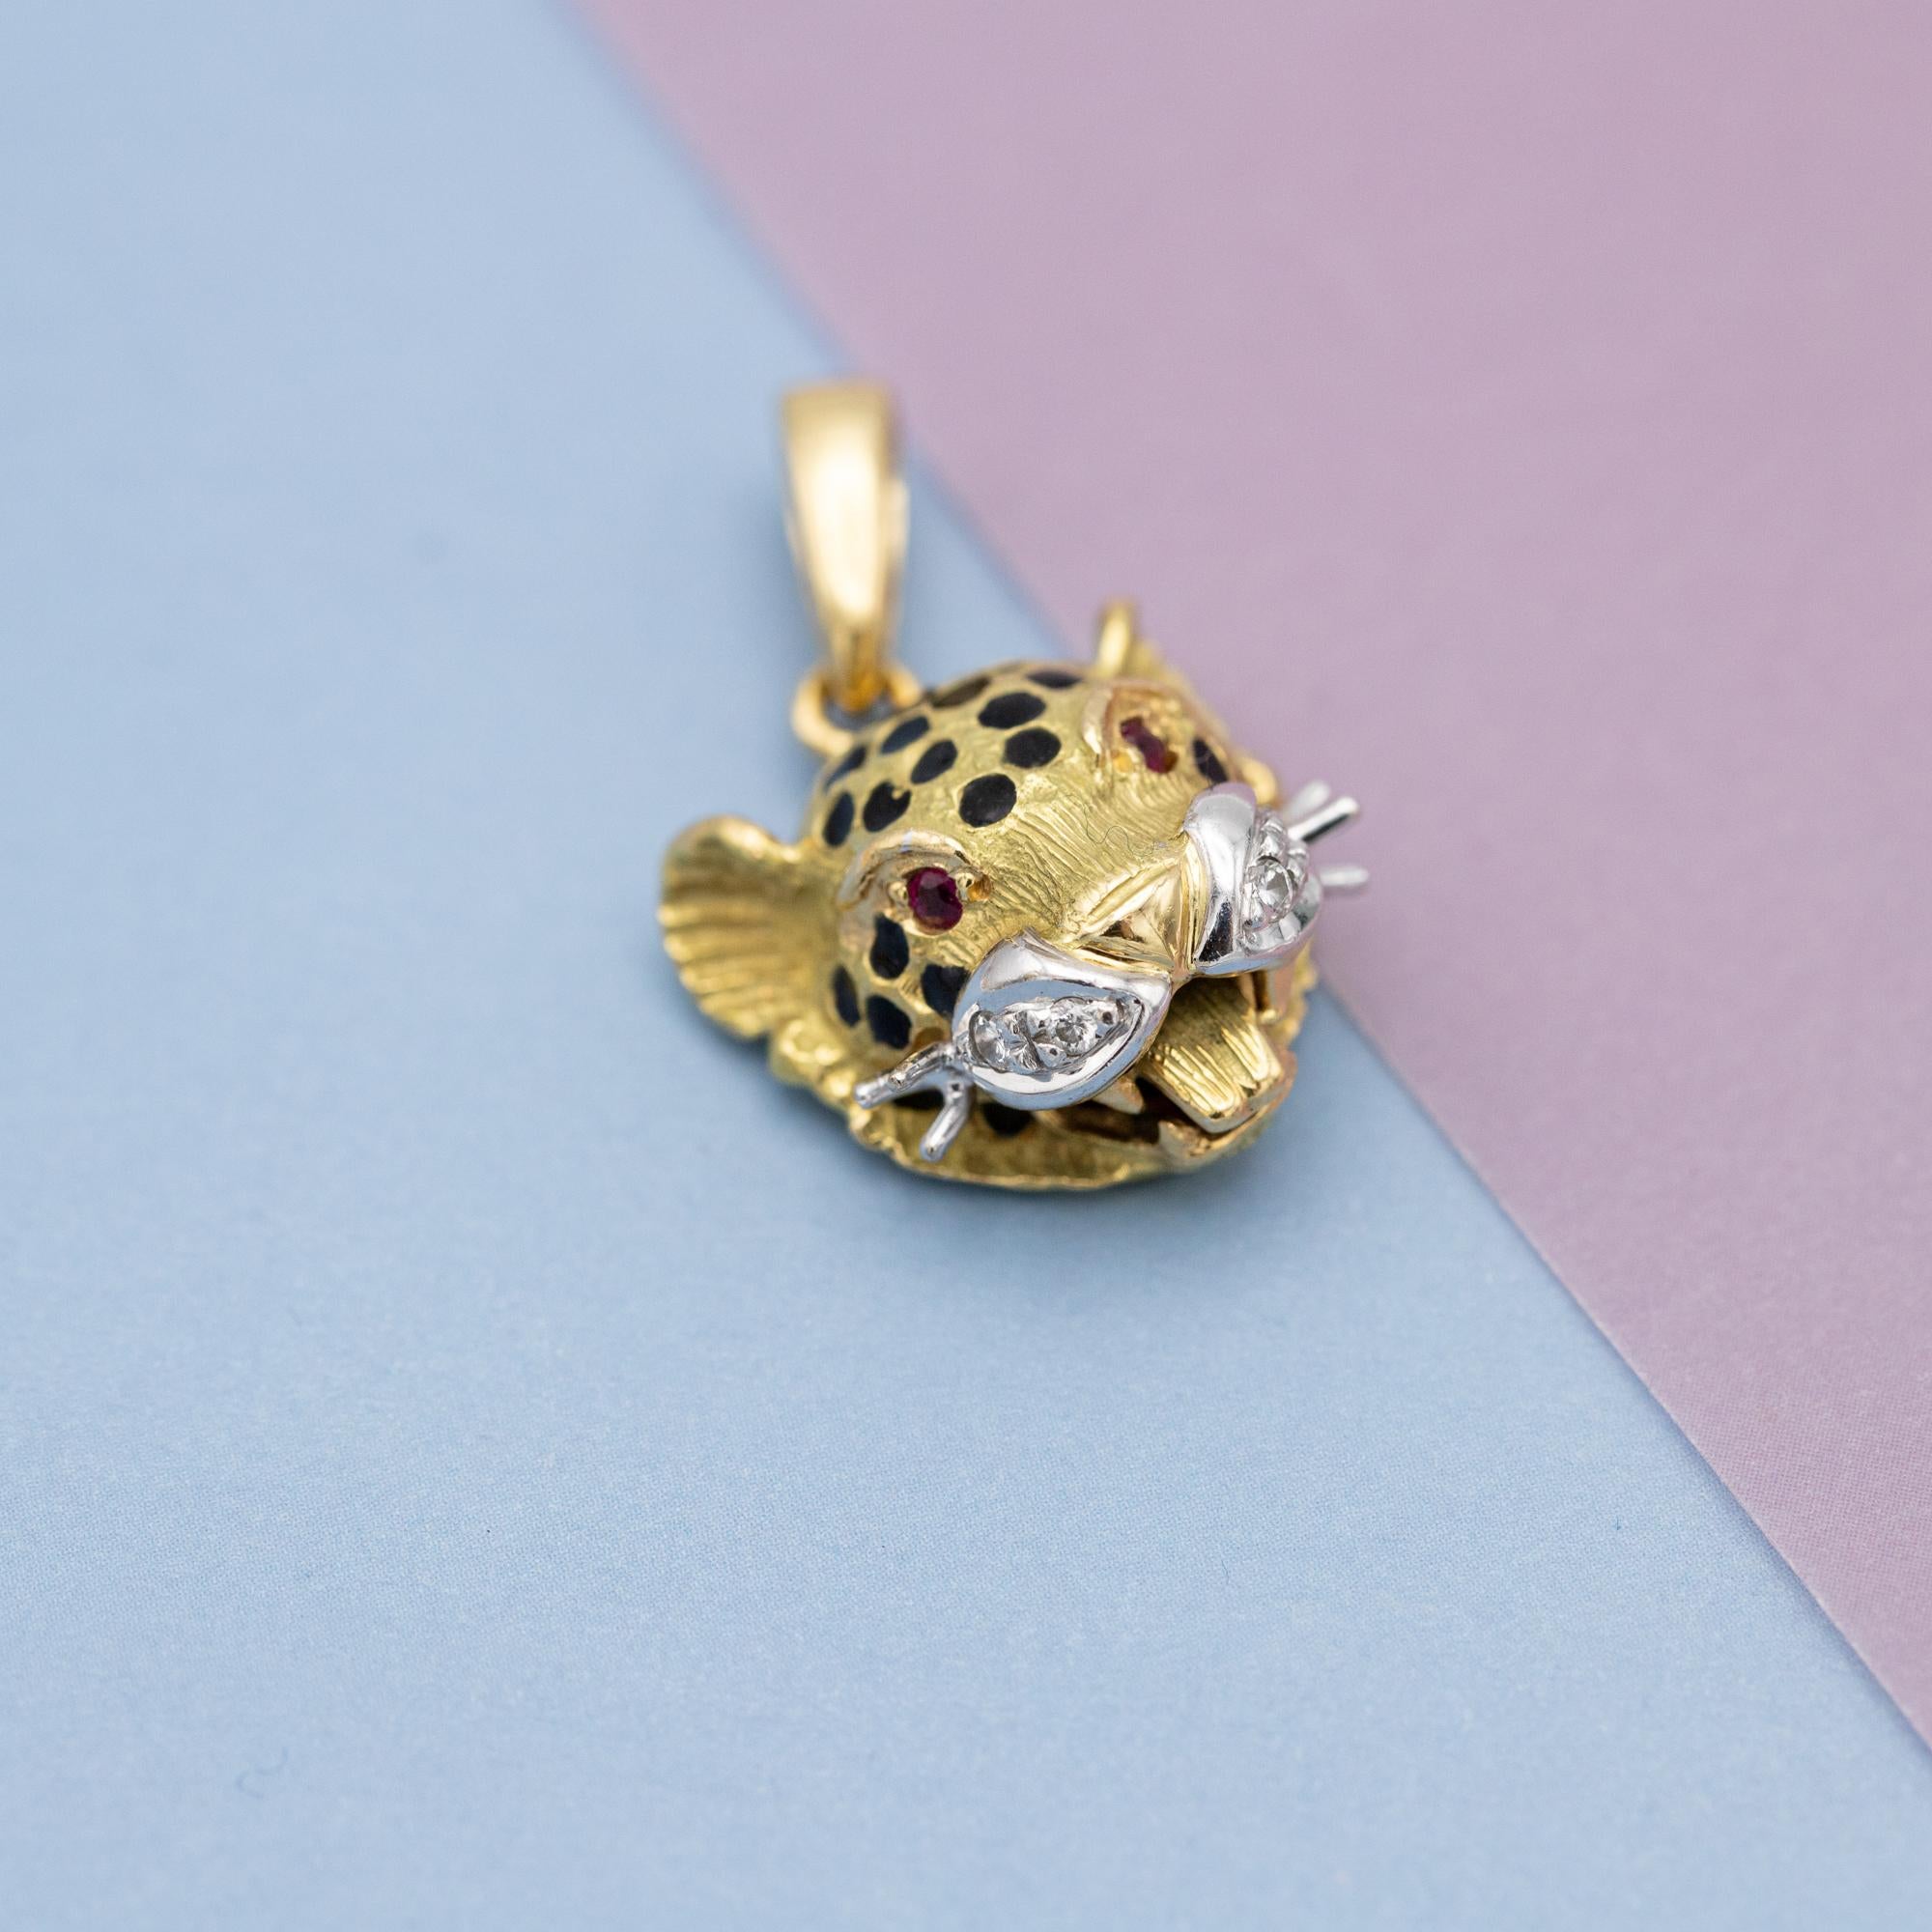 18k solid gold panther pendant - Vintage tiger charm - statement cat jewellery For Sale 1